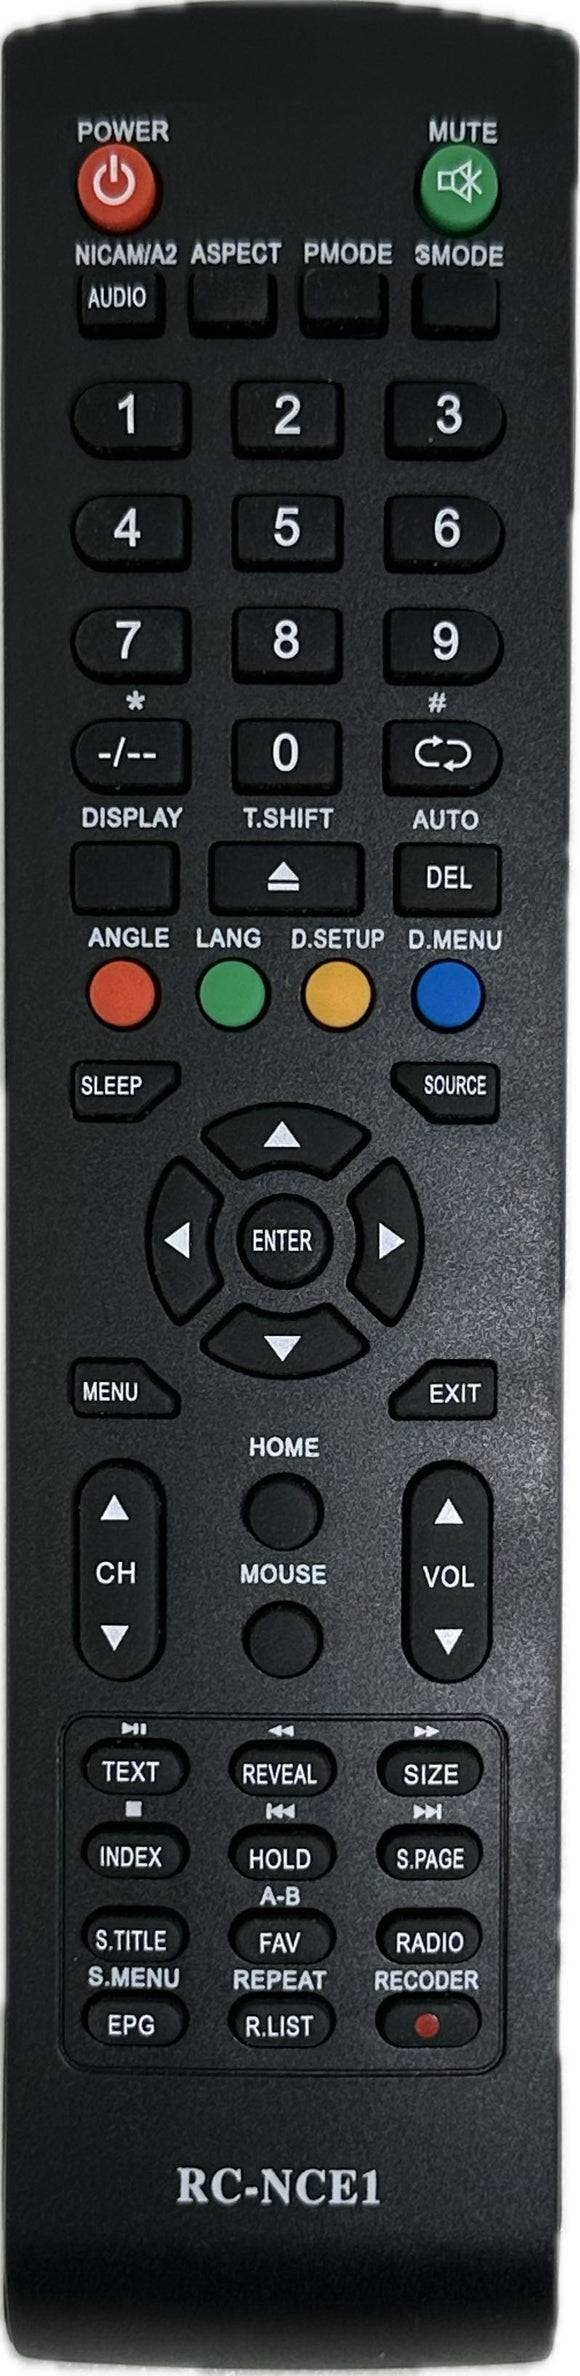 NCE NCE24LEDSMTCOMBBT TV Replacement  Remote Control